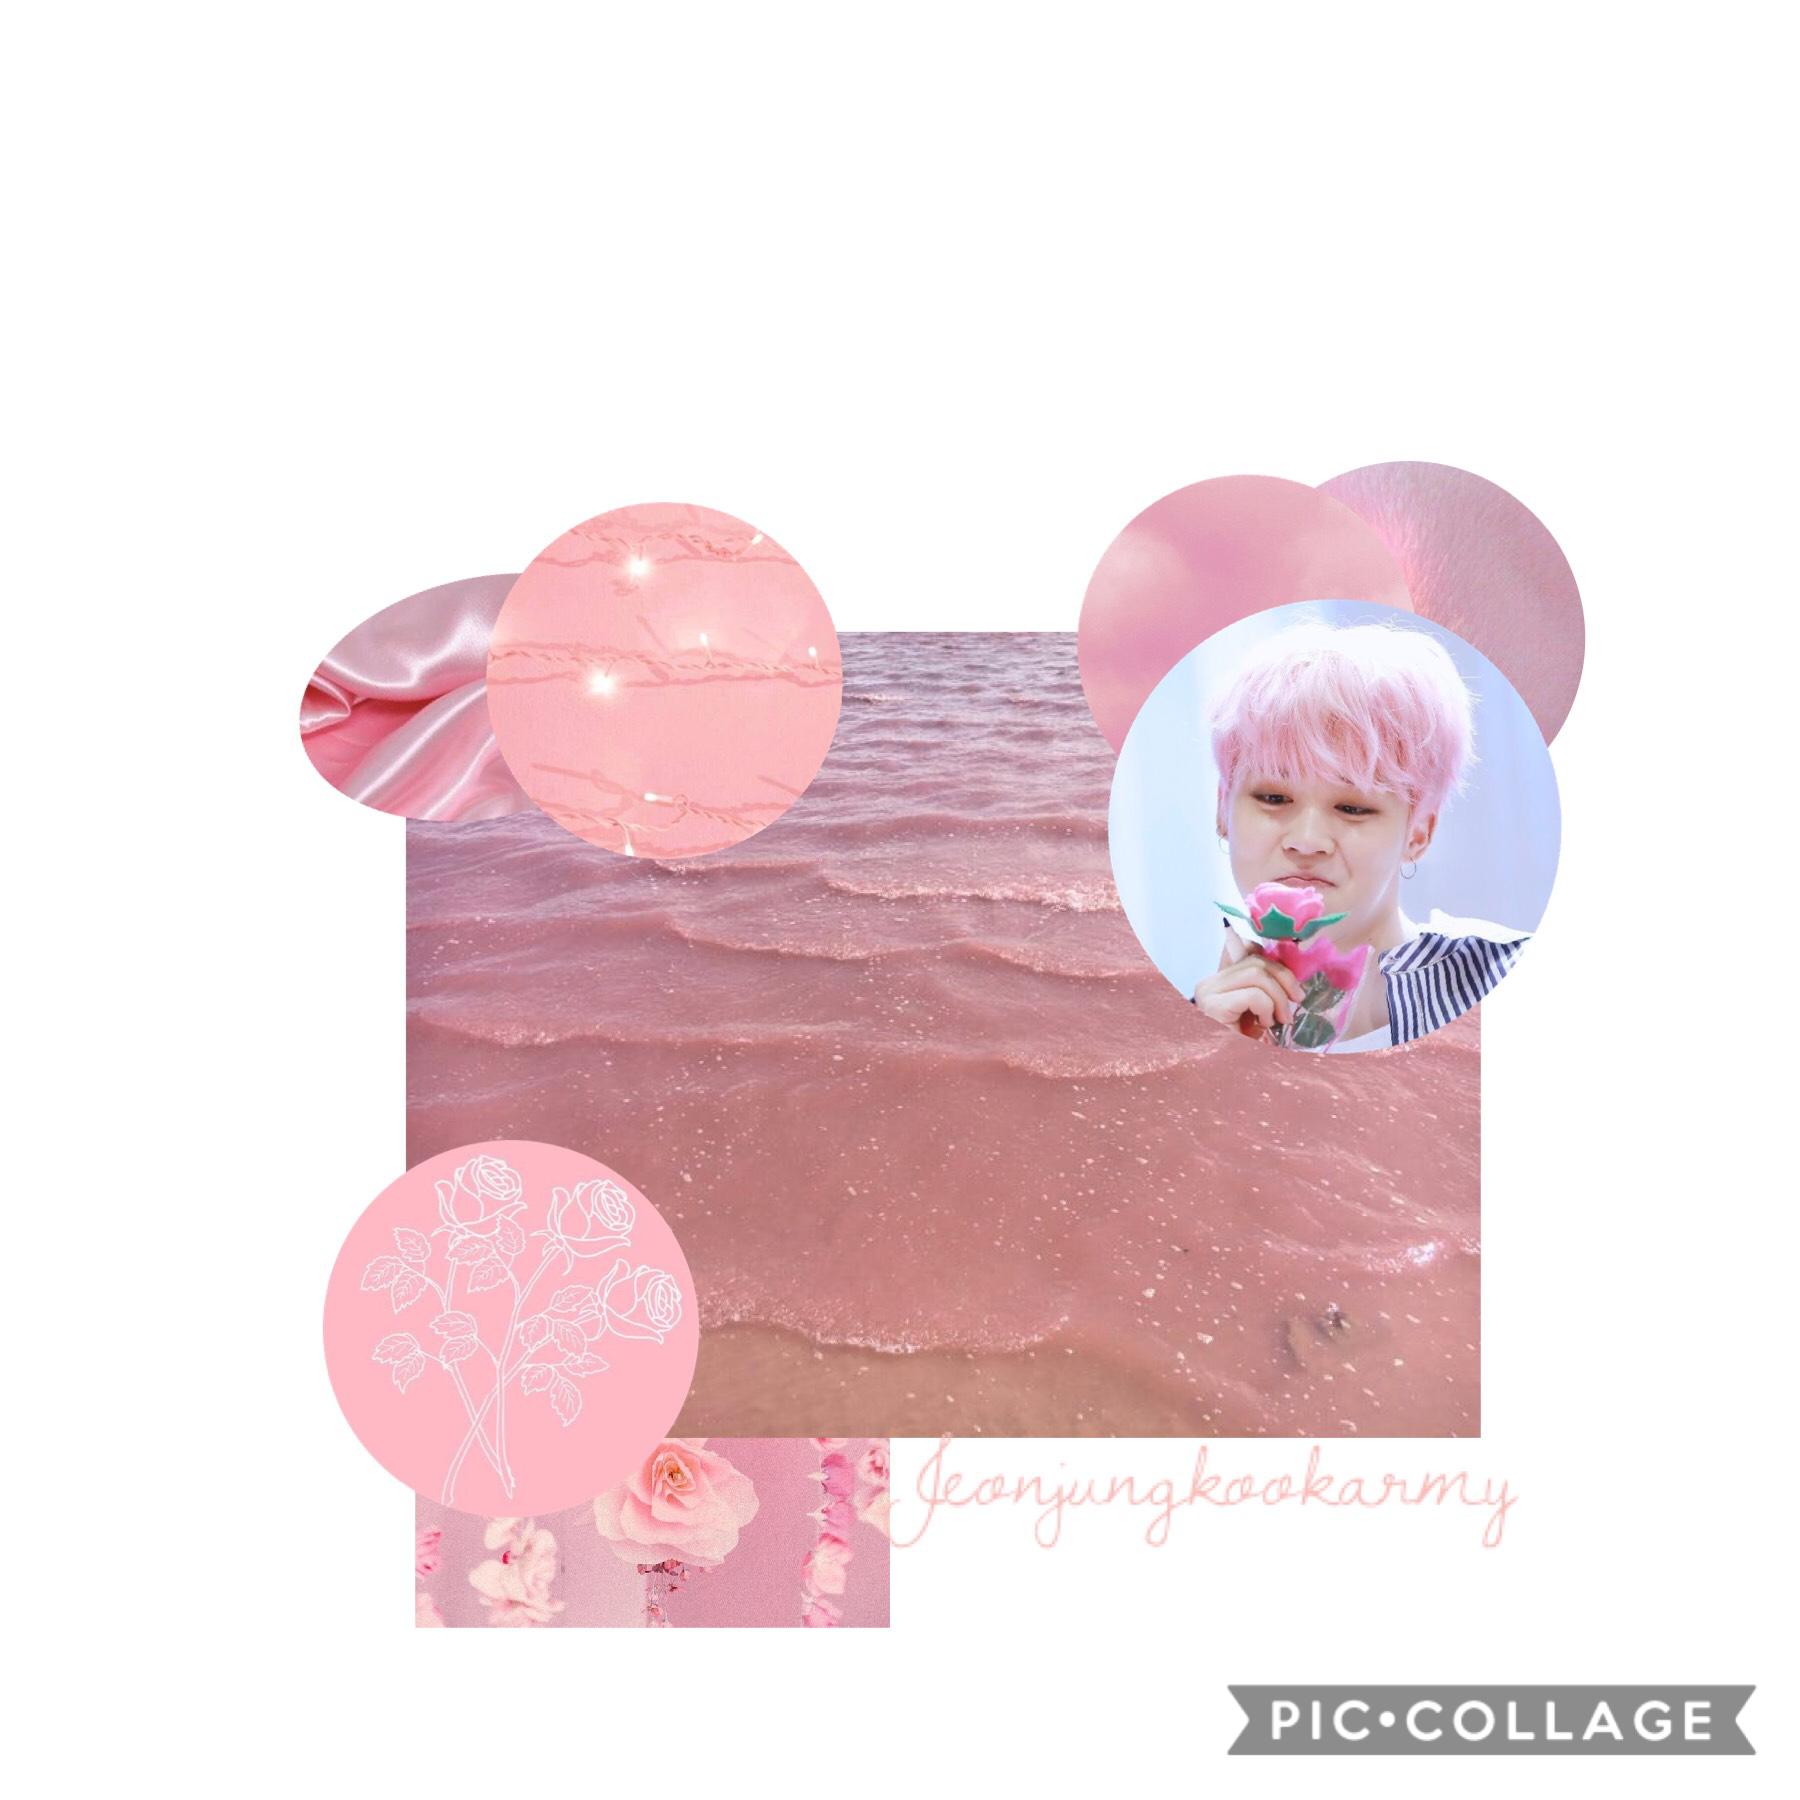 💗tap💗
Heyyyyy if this gets 16 likes I will officially do a face reaveal 